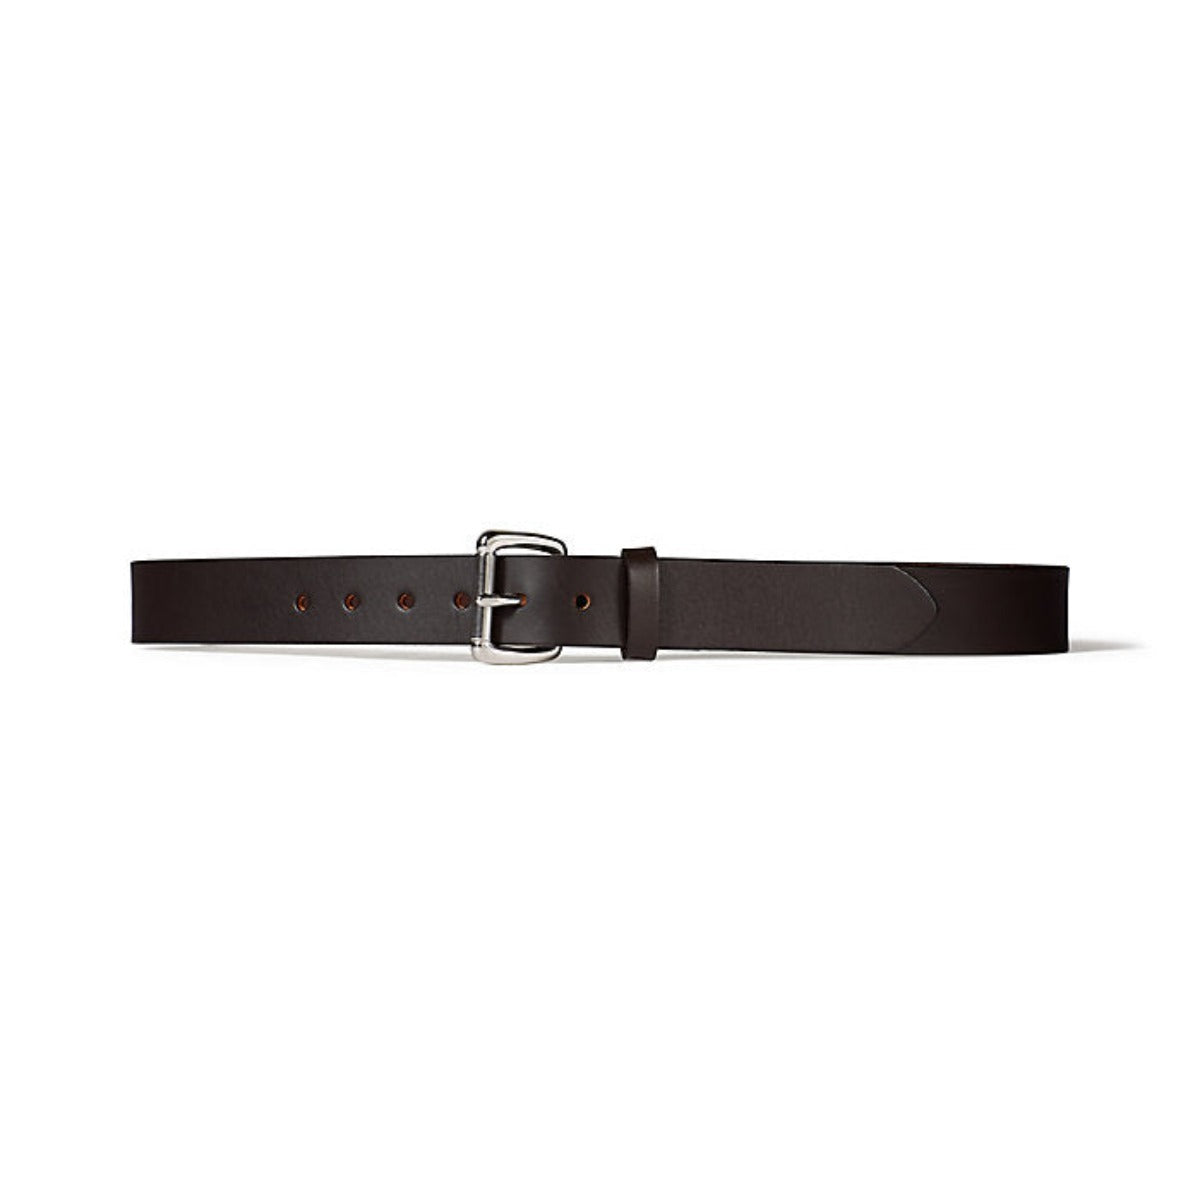 1 1/4" Leather Belt | Brown & Stainless